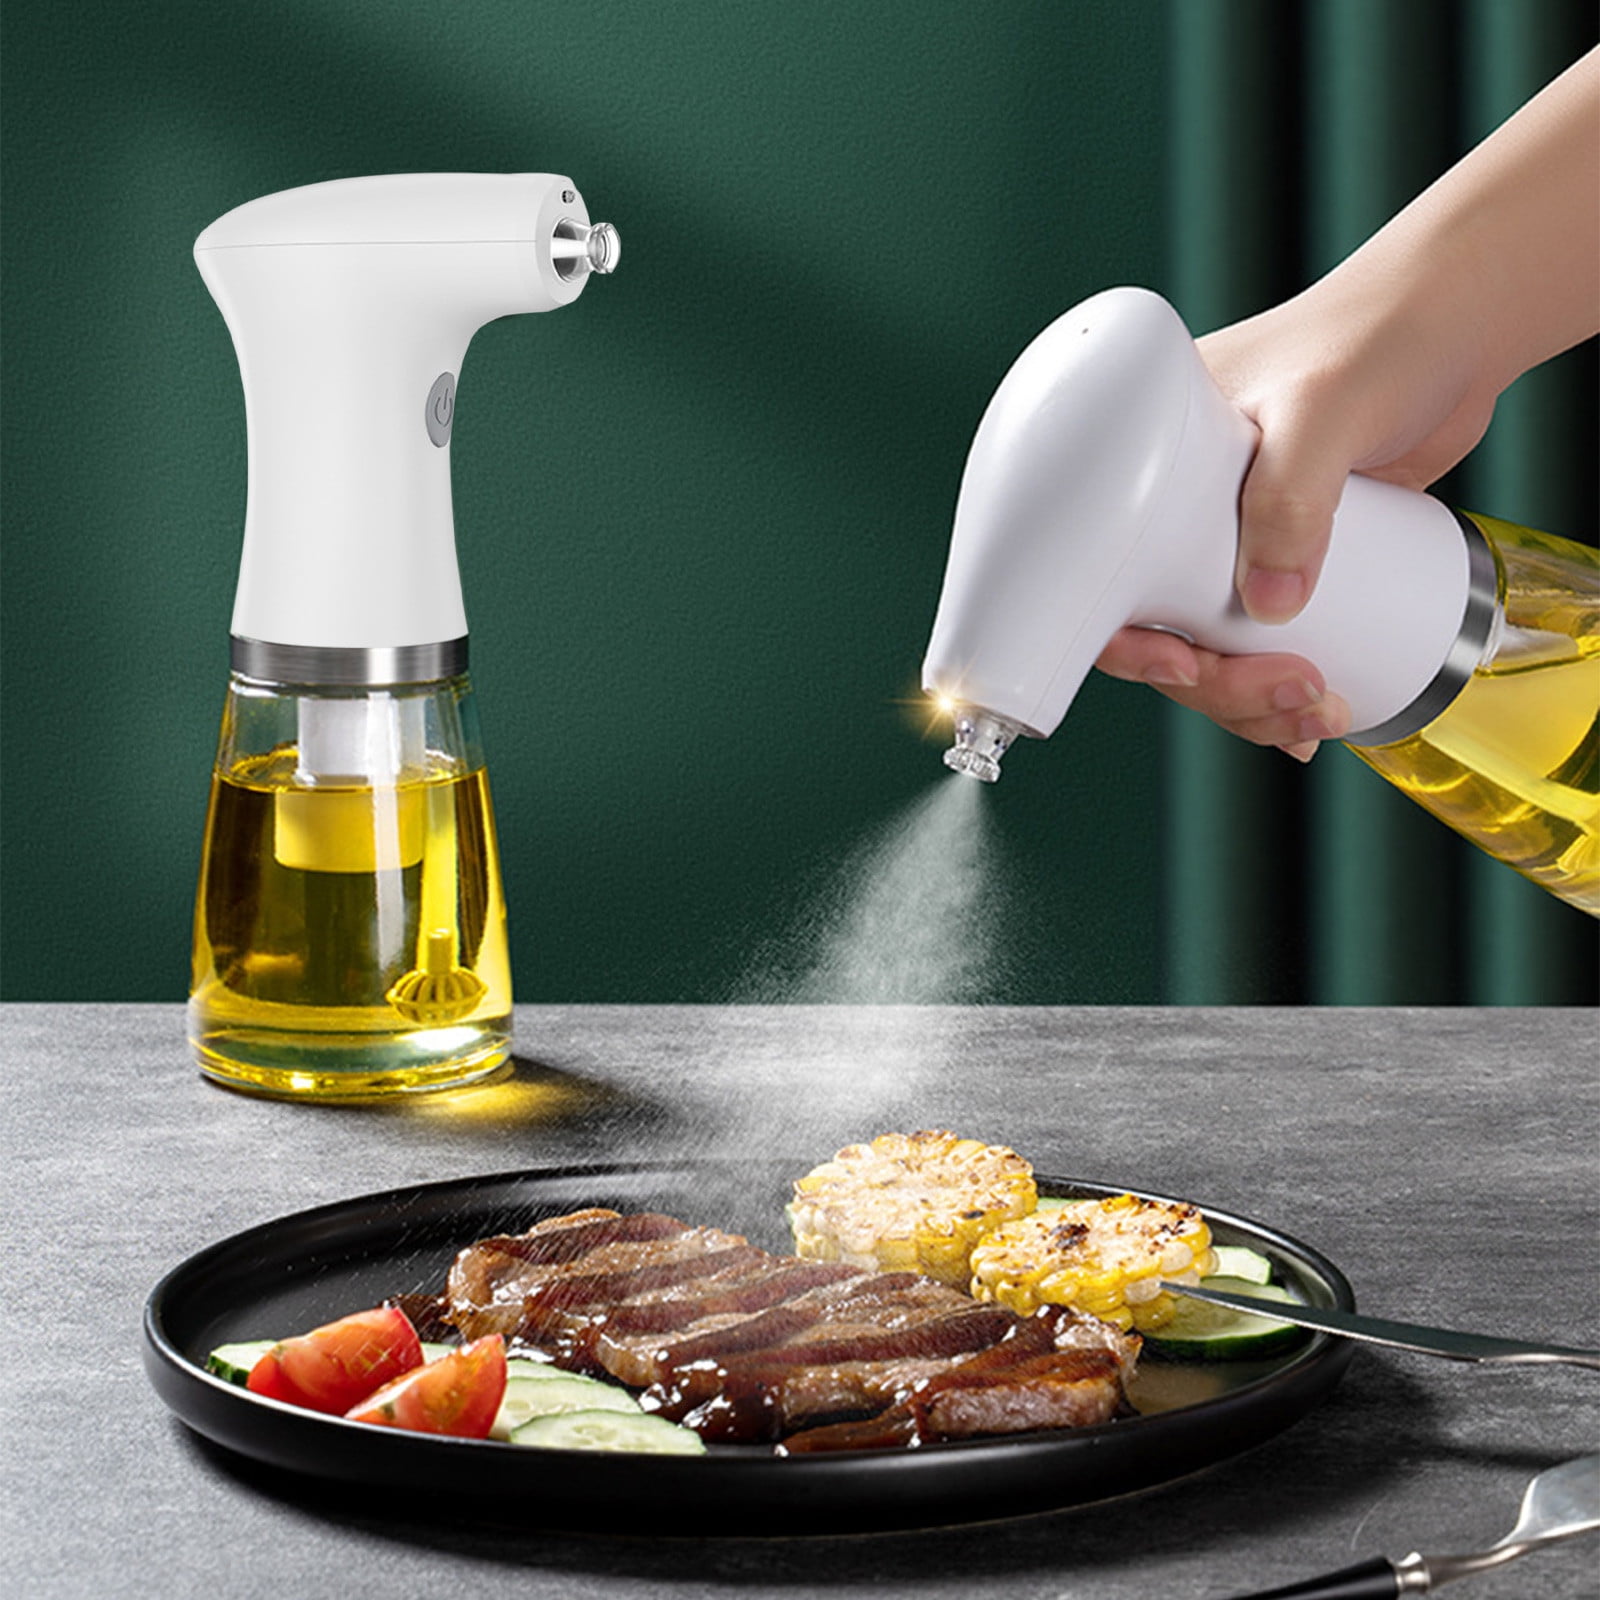 Dengmore Oil Sprayer for Cooking Electric Oil Sprayer For Cooking